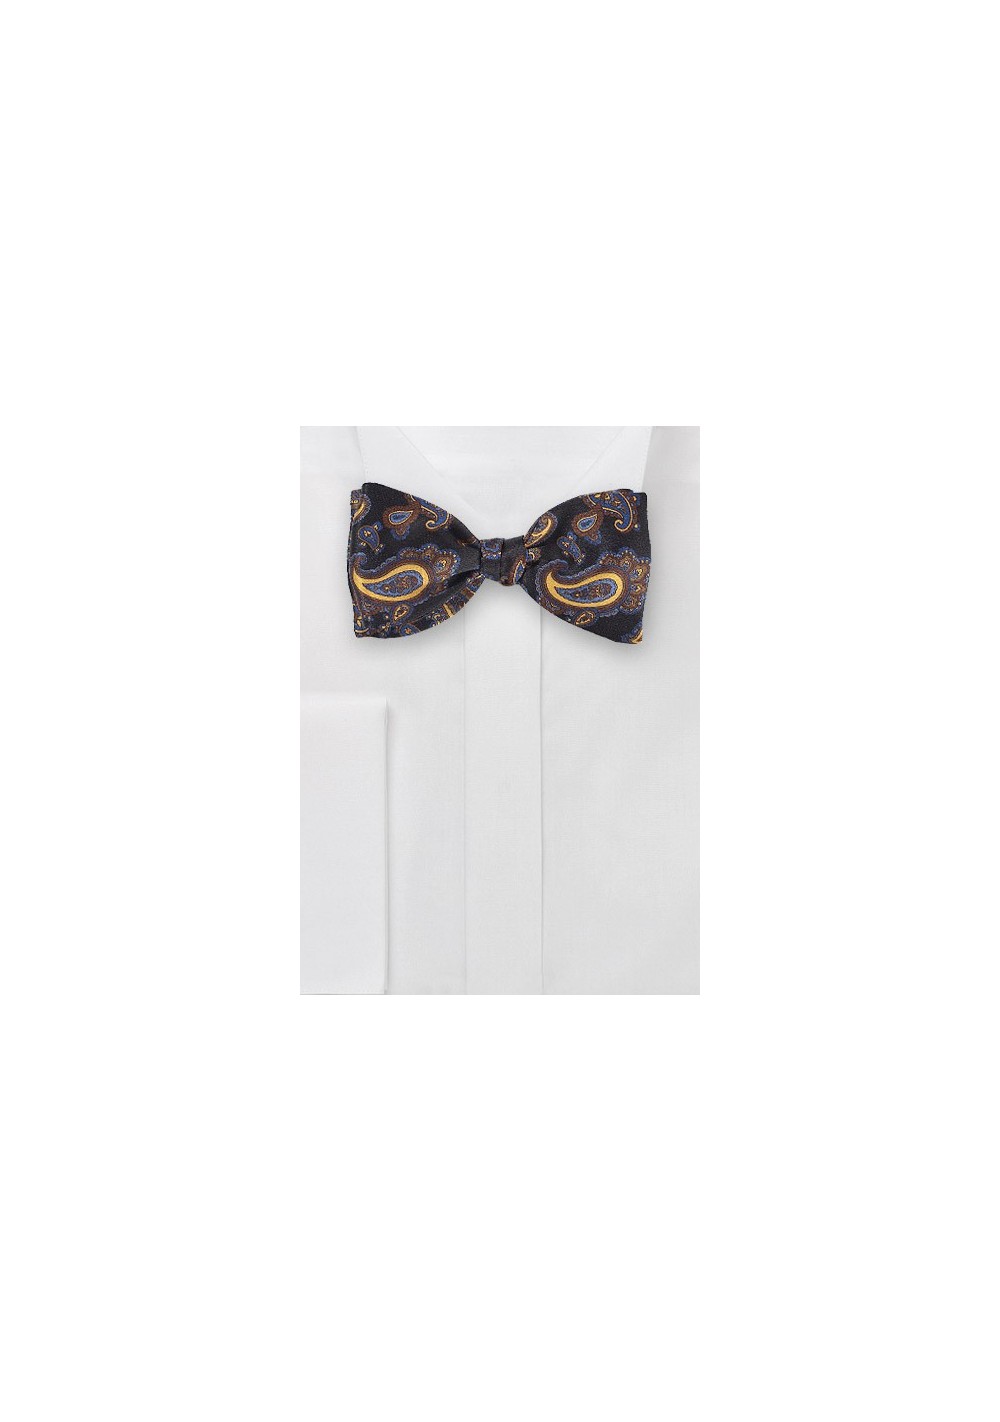 Moroccan Paisley Bow Tie in Black, Golds and Blues